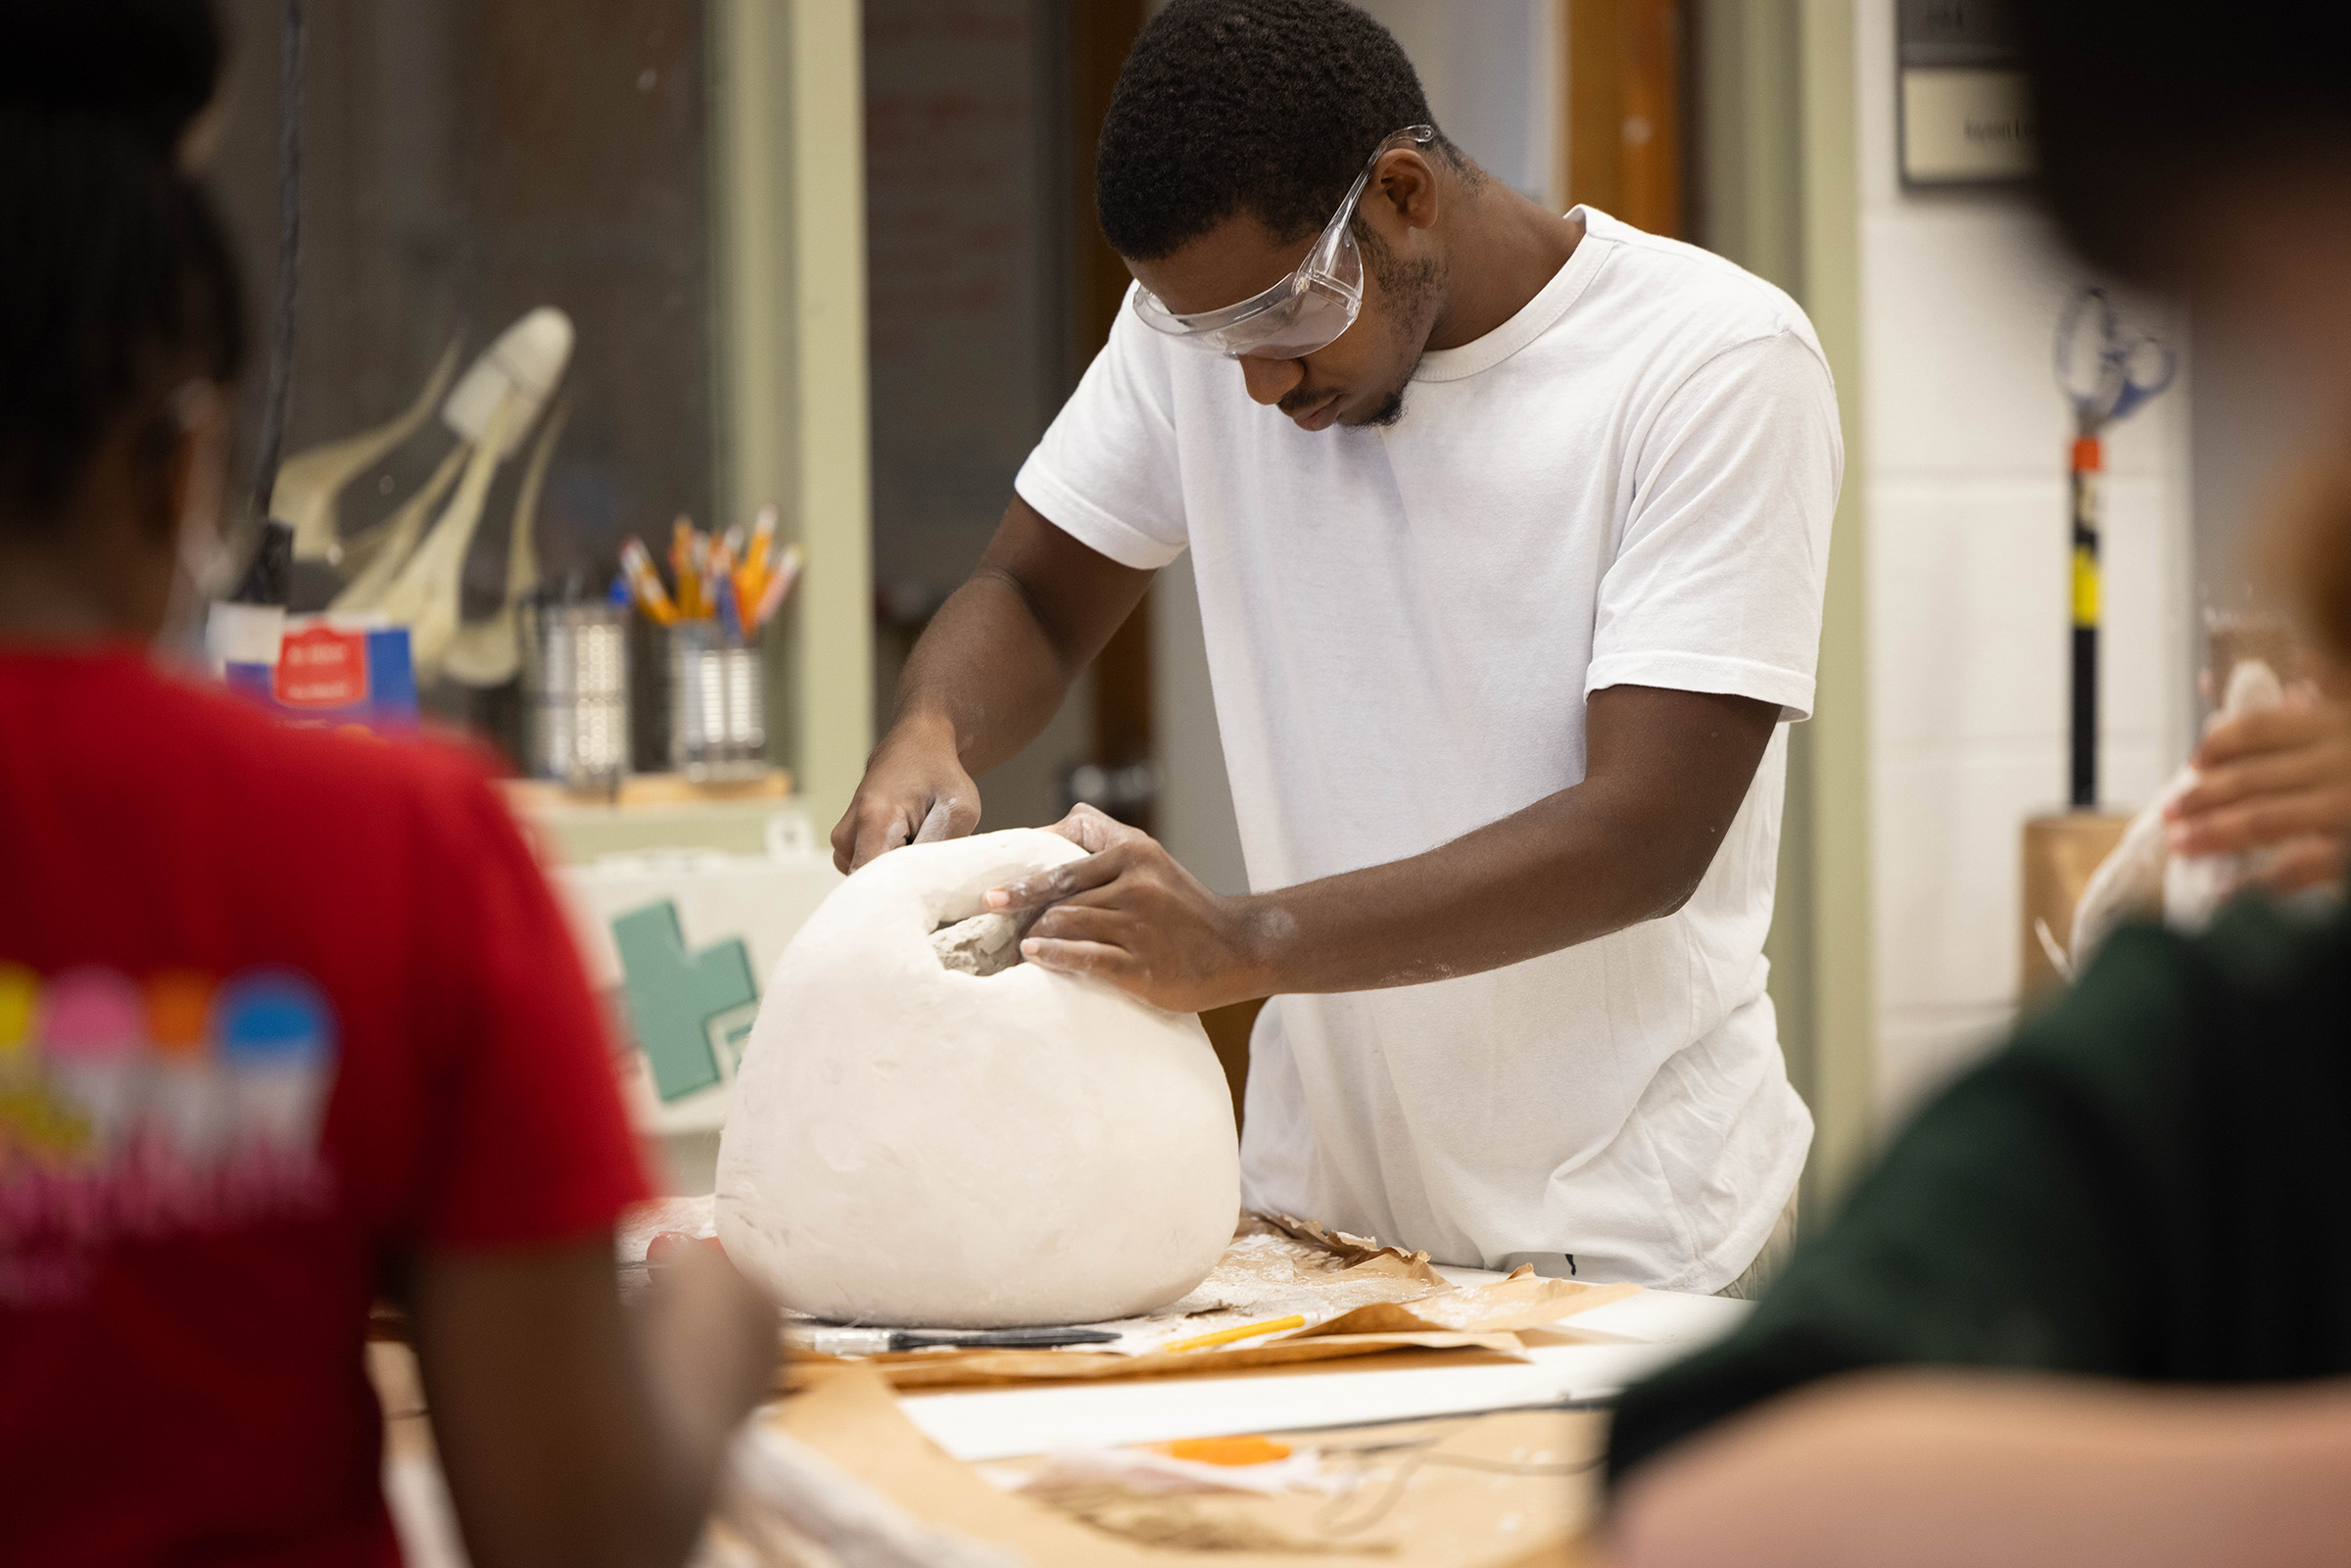 A student sculpts with clay